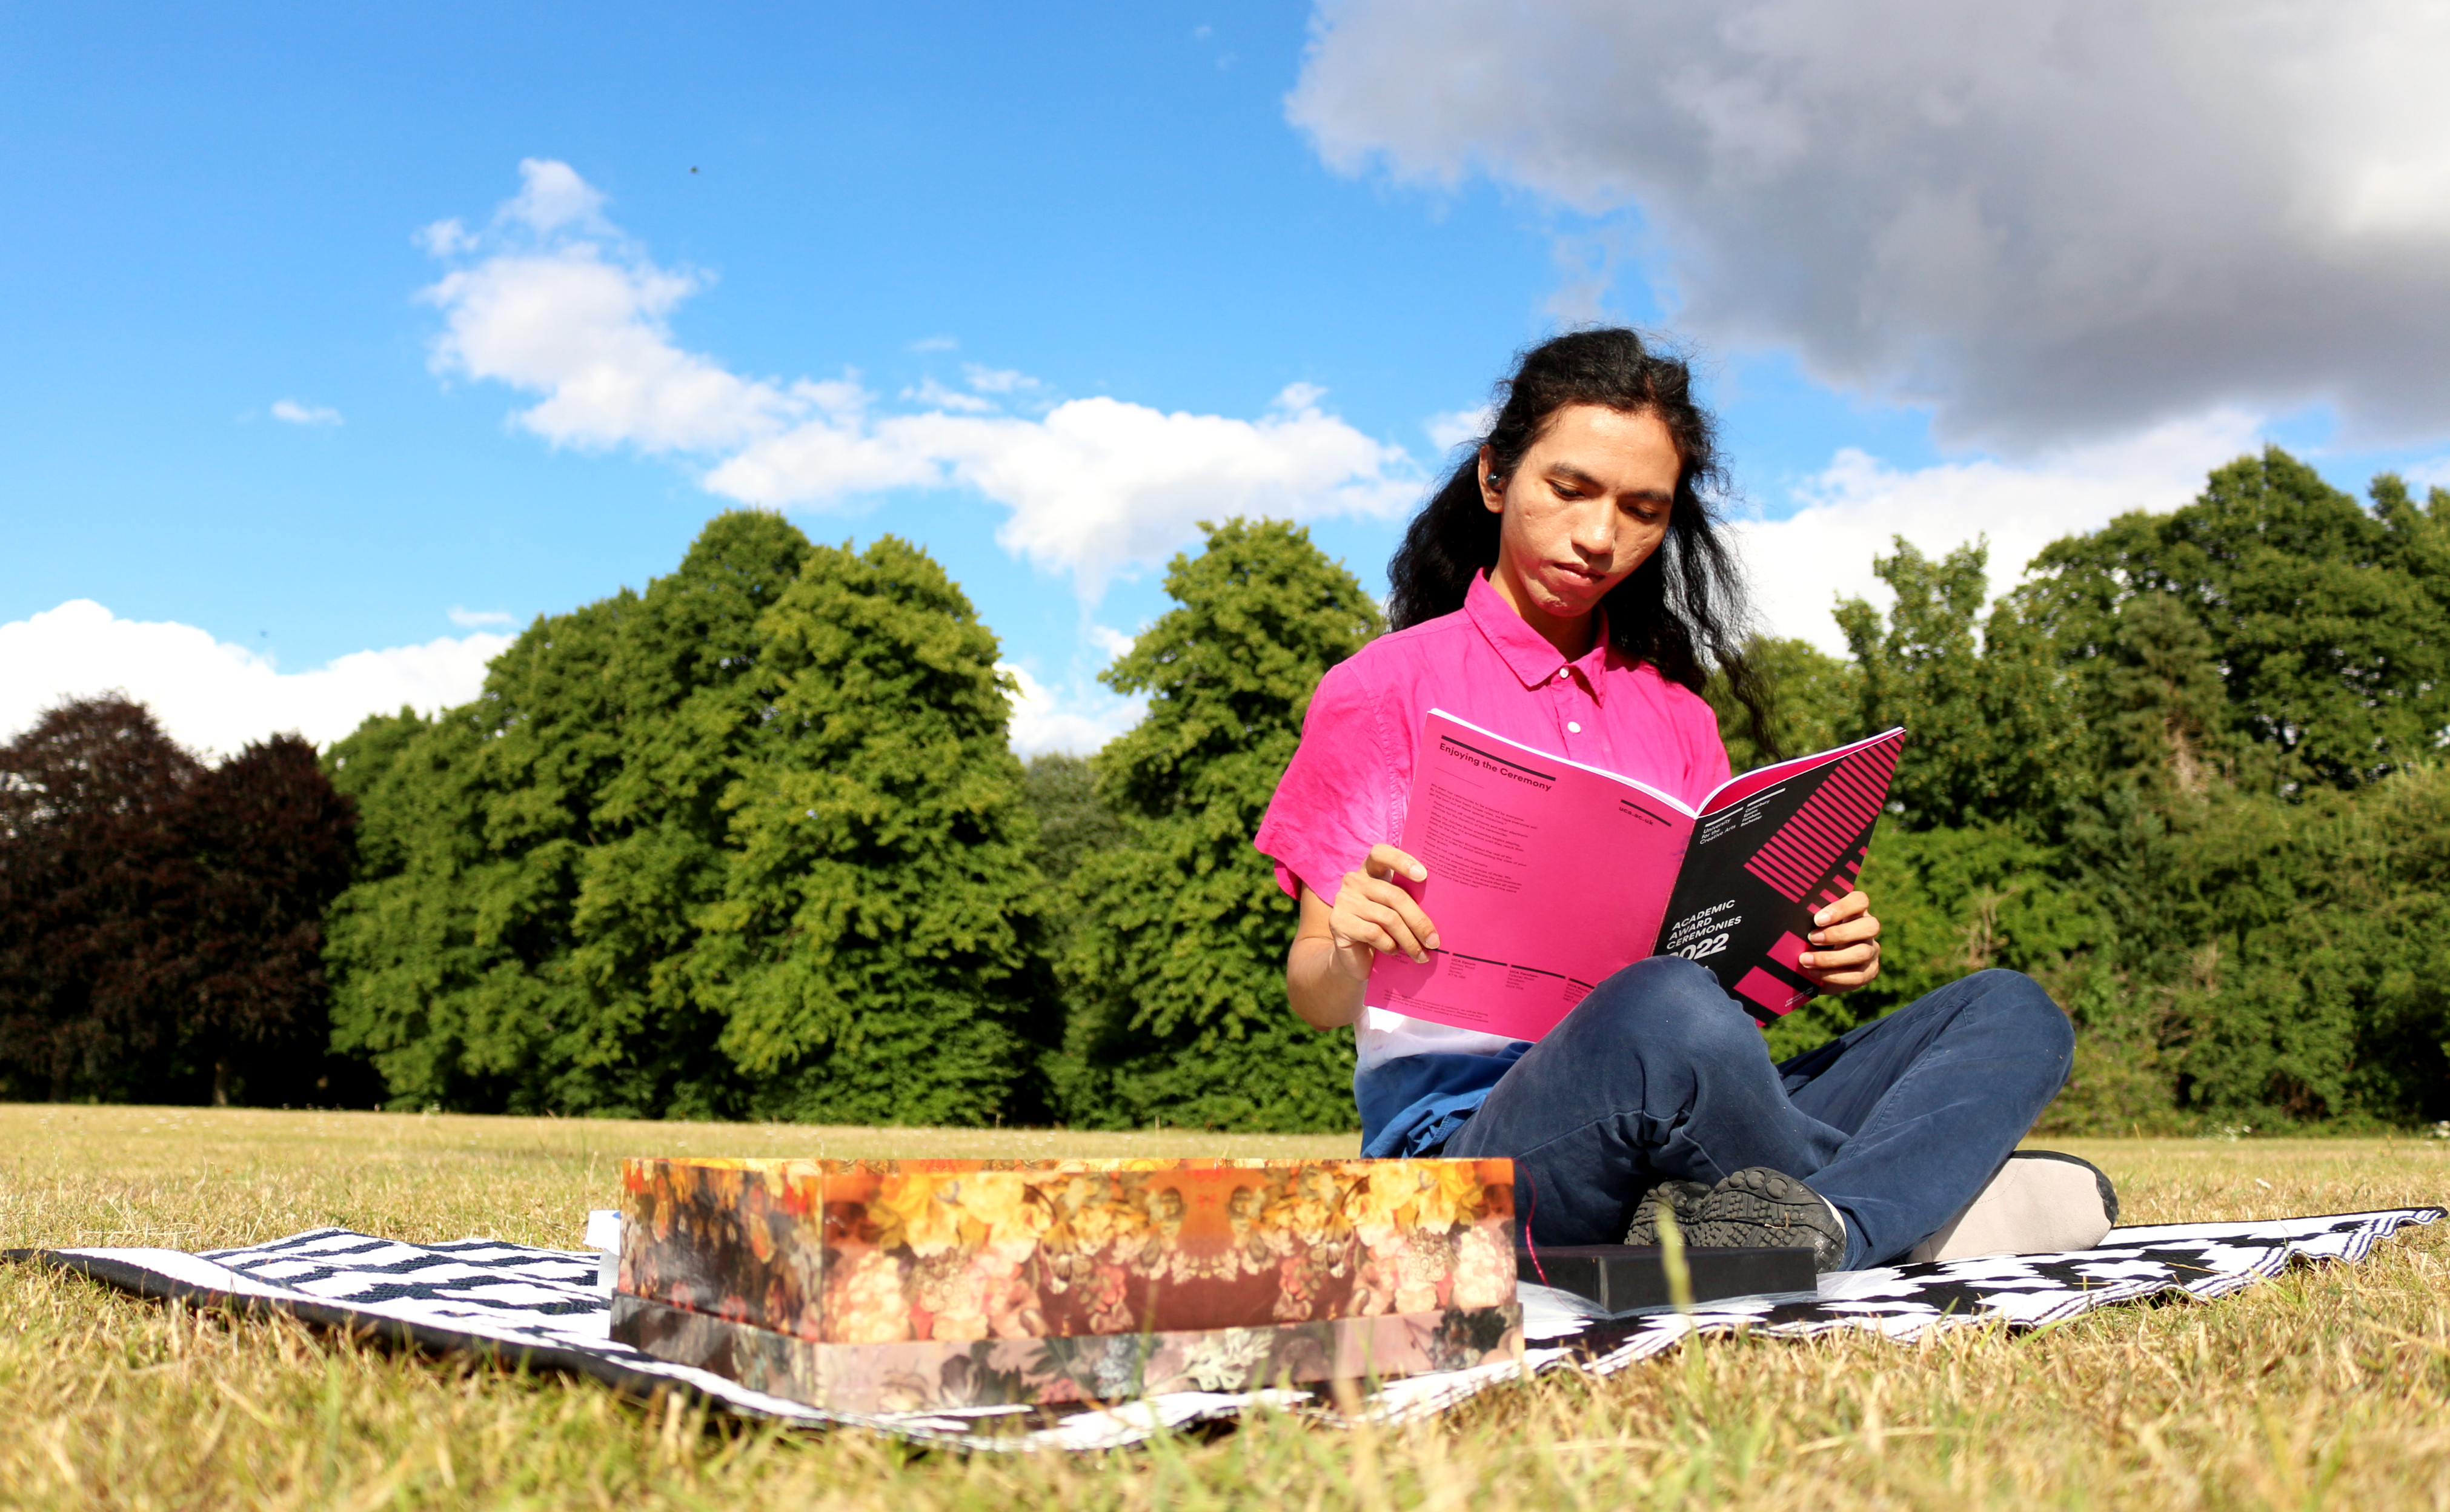 A person sits on a black and white blanket on green grass in a park. They wear a pink shirt and blue jeans. They look down reading a book.